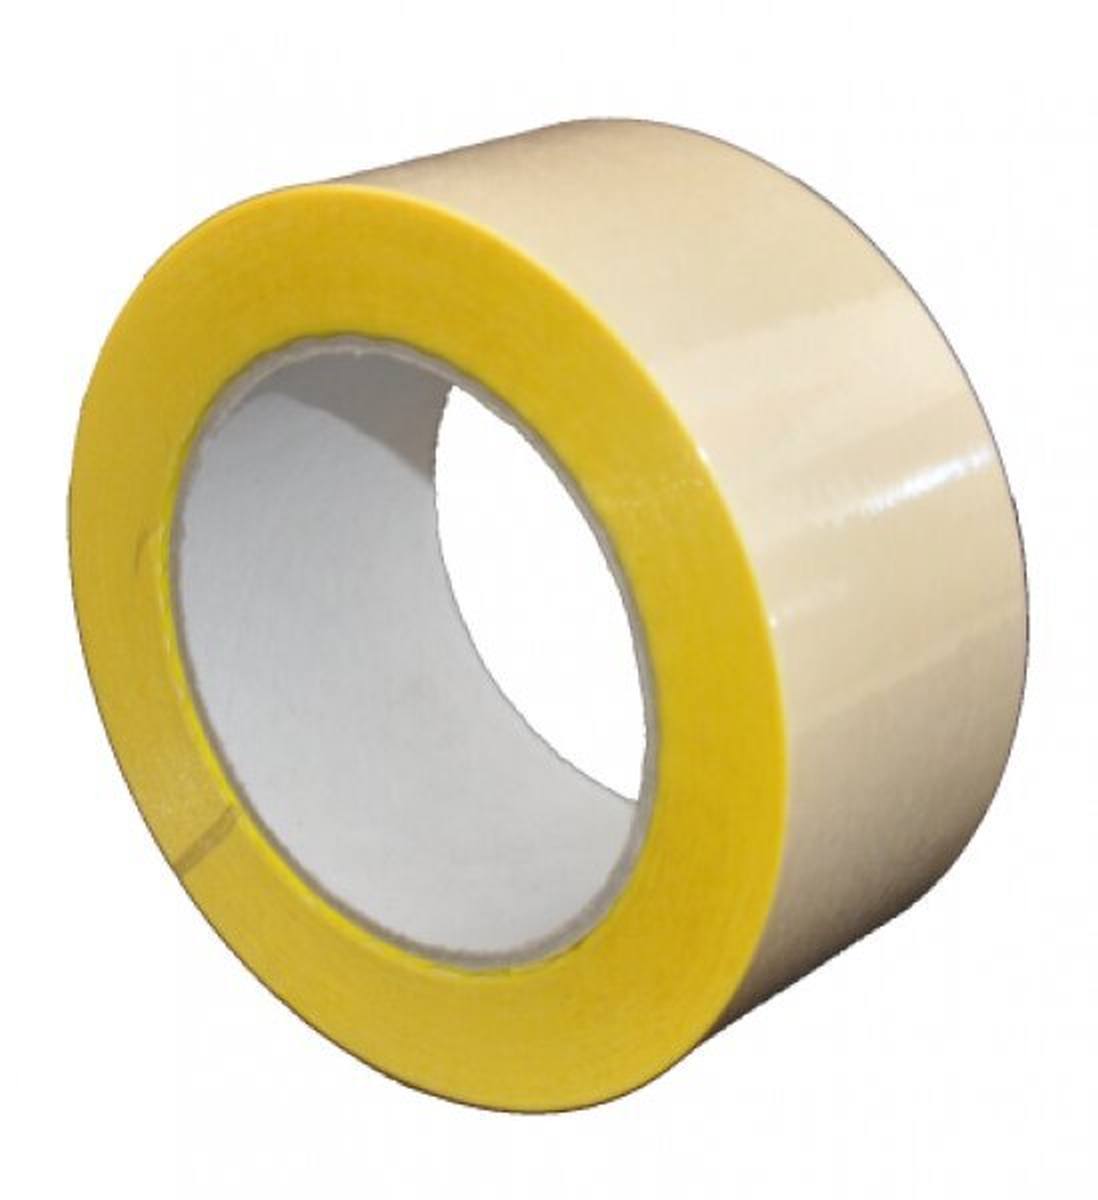 S-K-S 407 Double-sided adhesive tape with polypropylene backing, high / low tack, yellow, 125 mm x 50 m, 0.15 mm